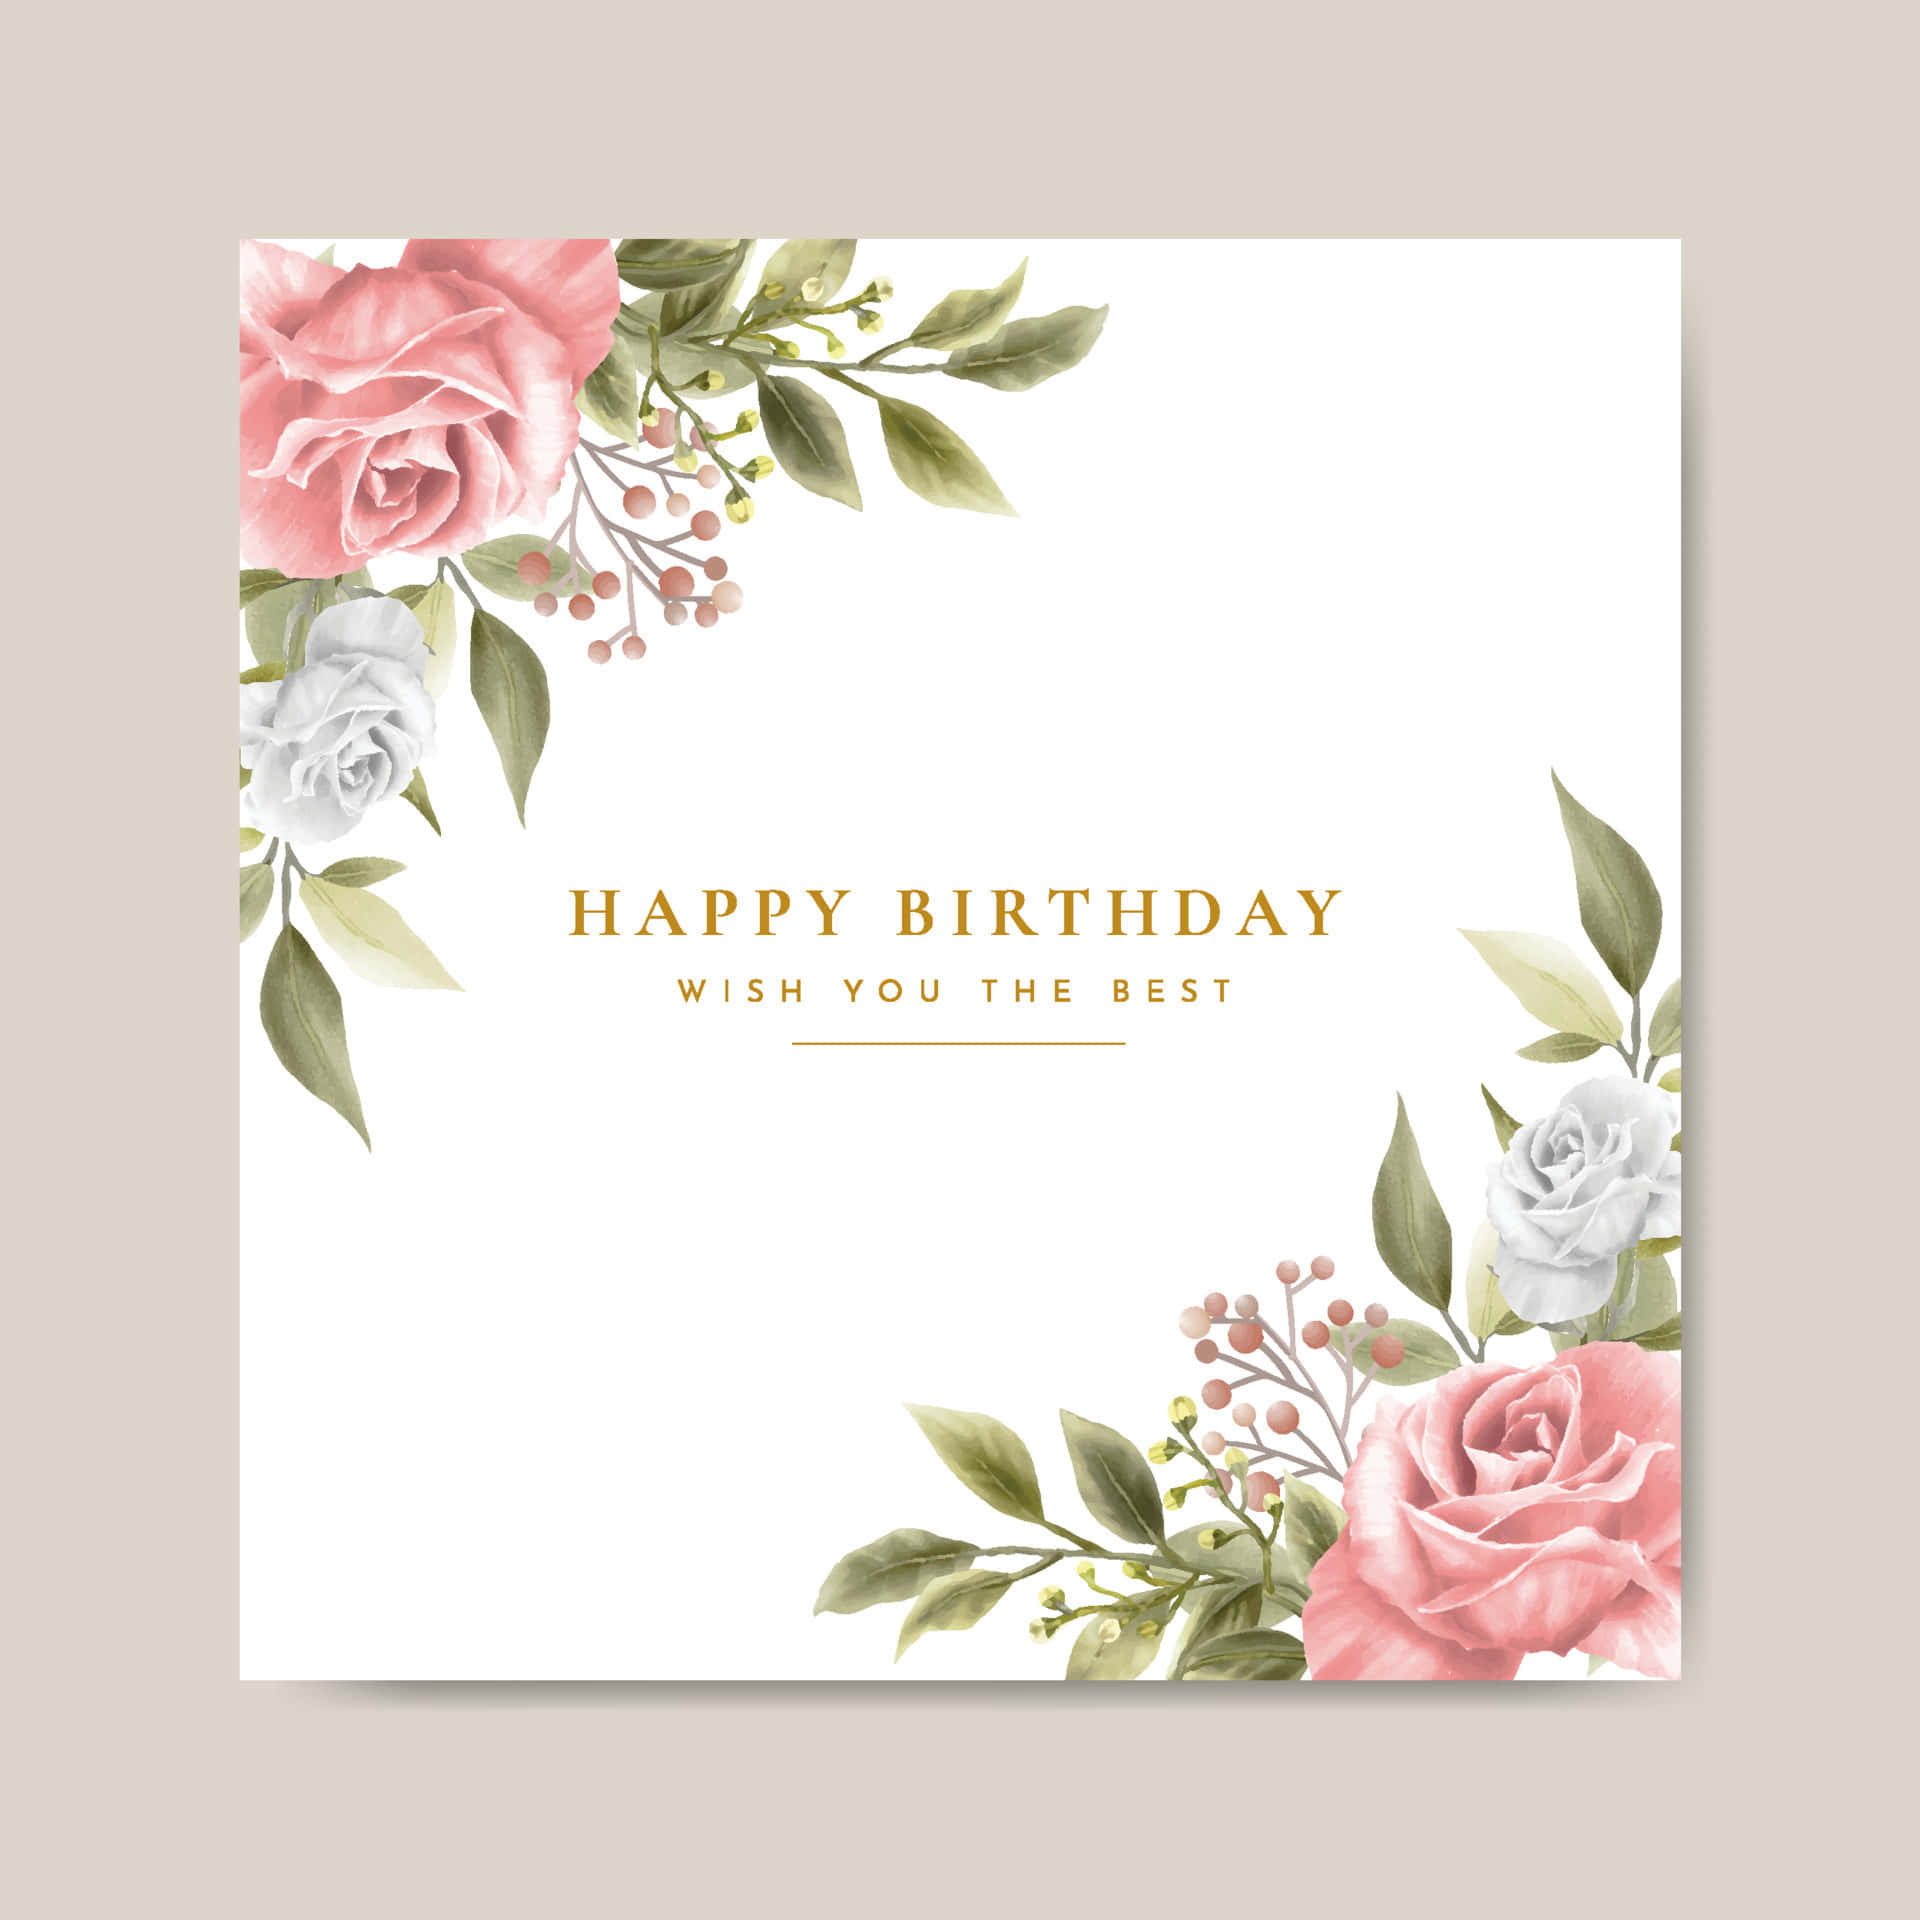 Birthday Card Pictures Wallpaper